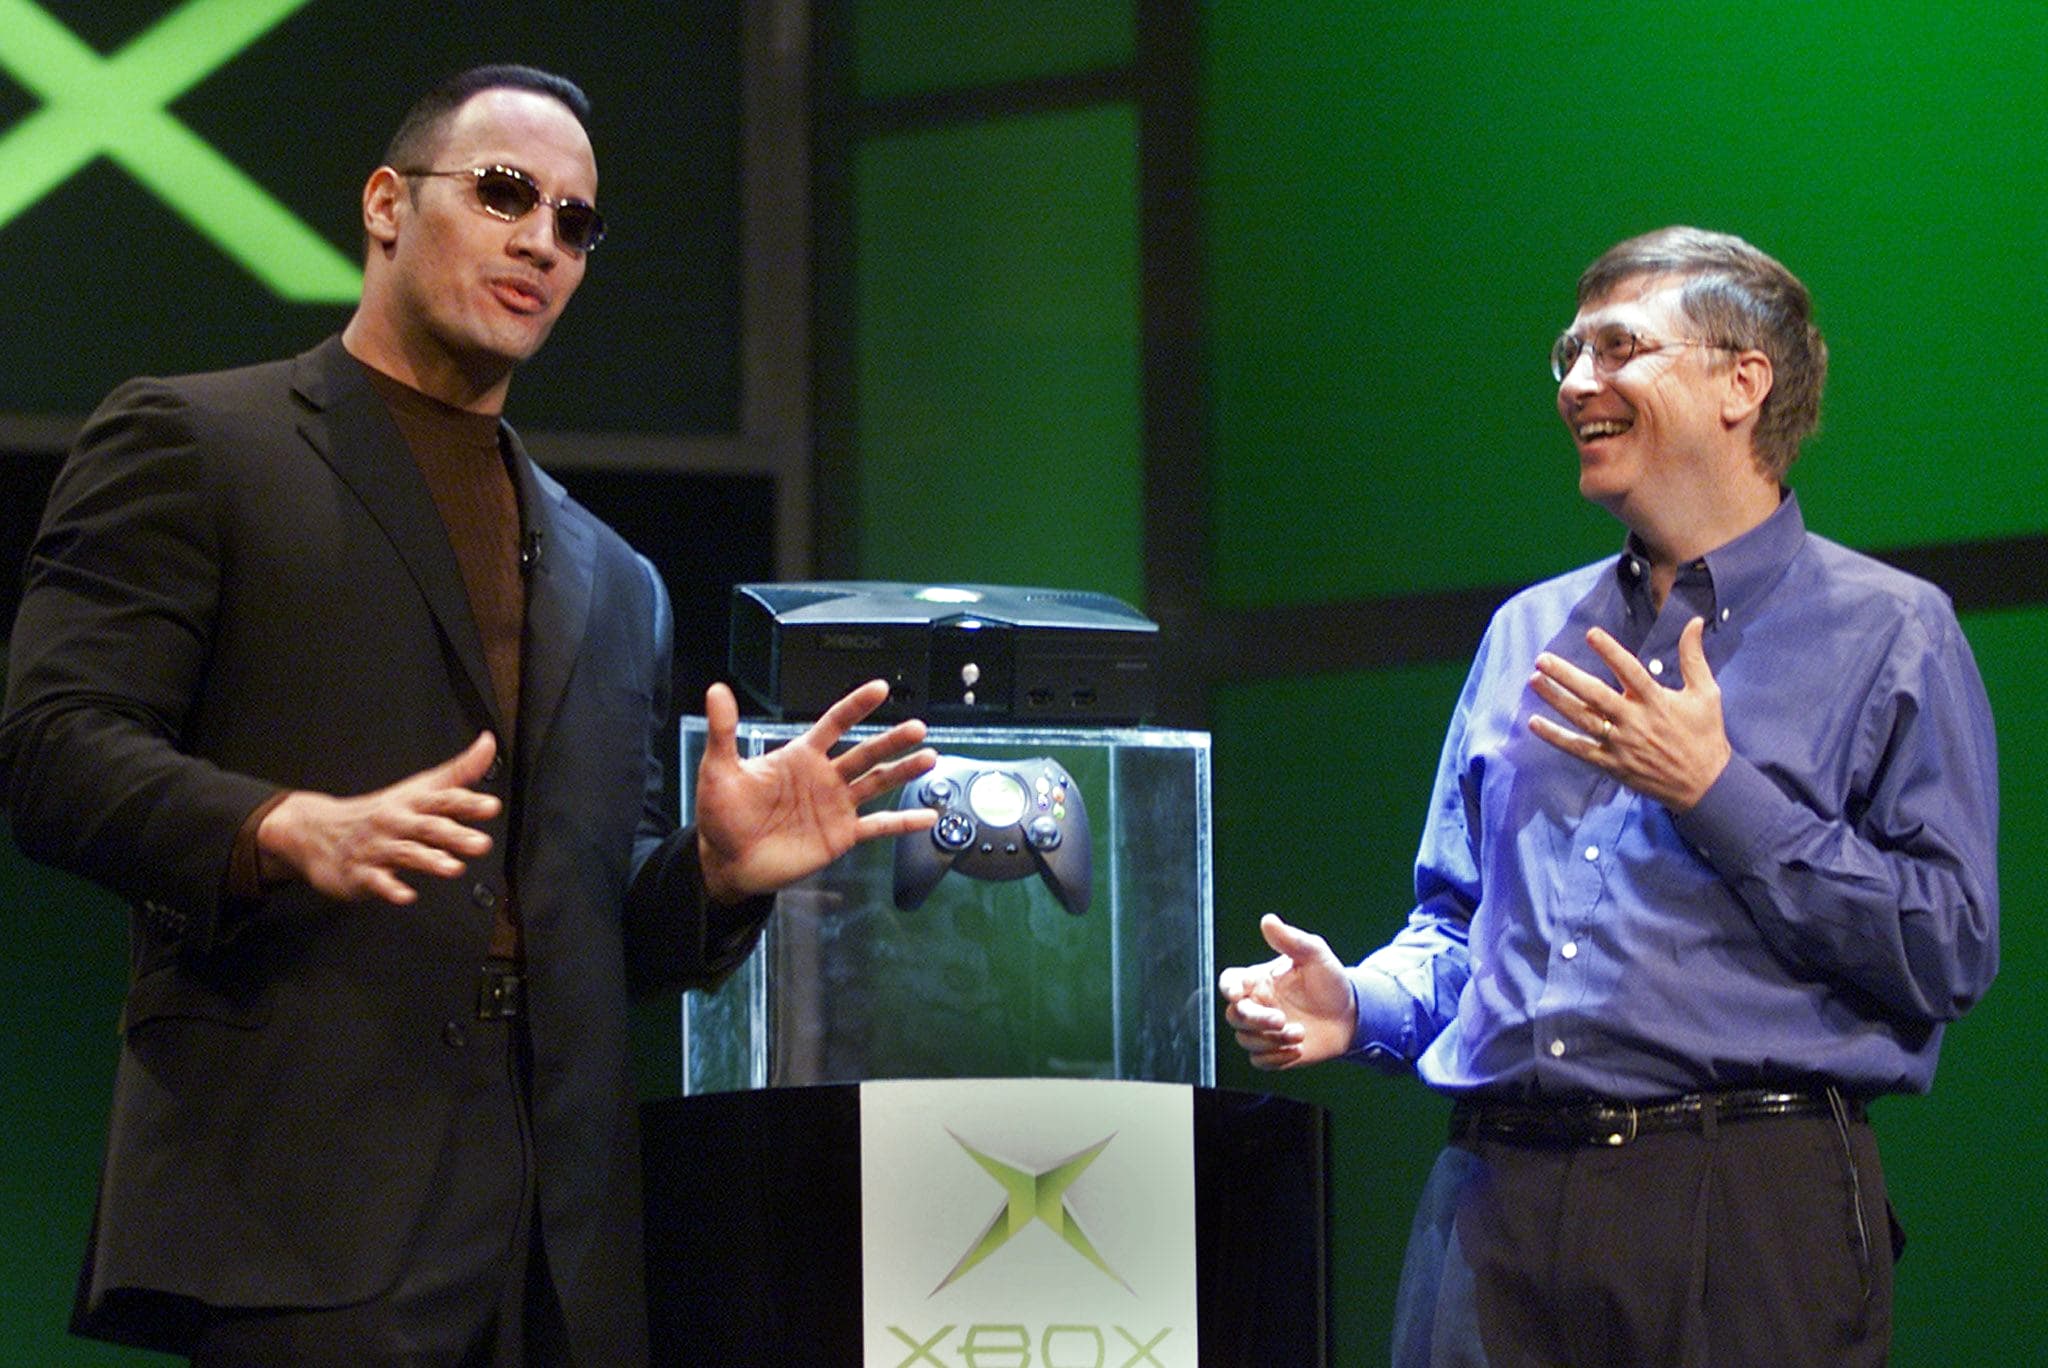 Video of Dwayne The Rock Johnson Bill Gates launching XBox at 2001 CES